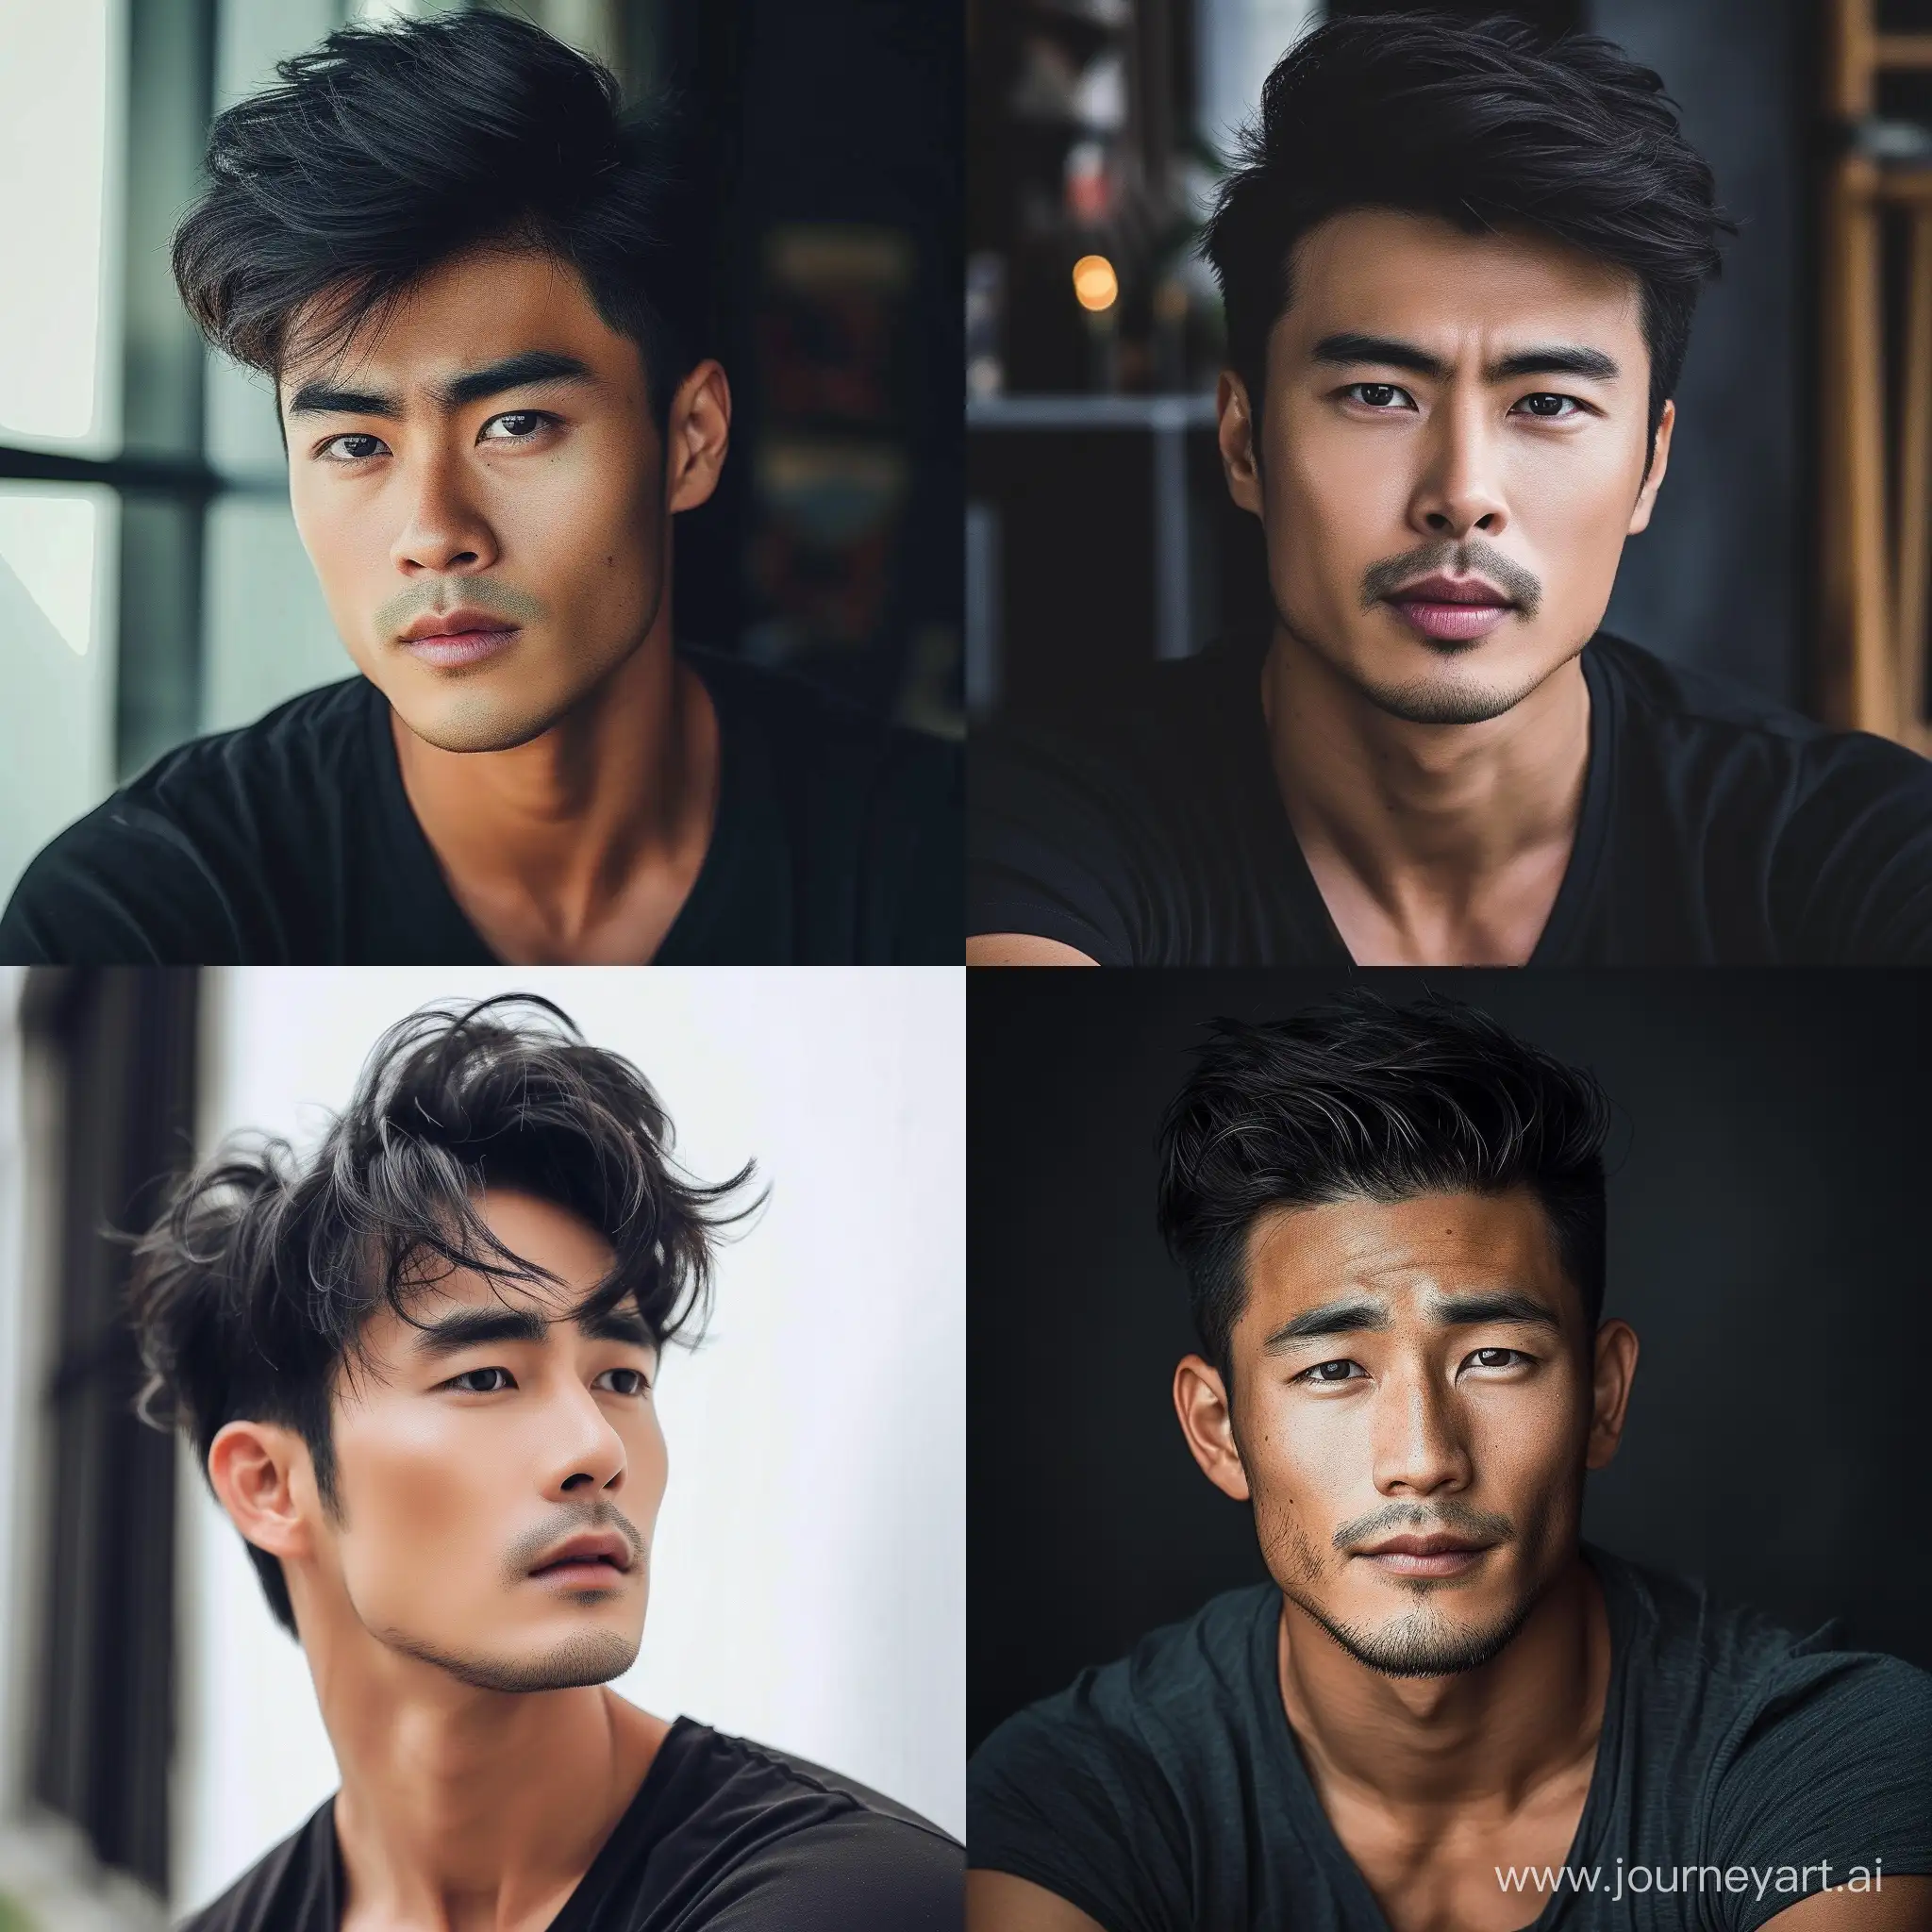 Handsome-Asian-Man-with-Confident-Gaze-in-Portrait-Style-Image